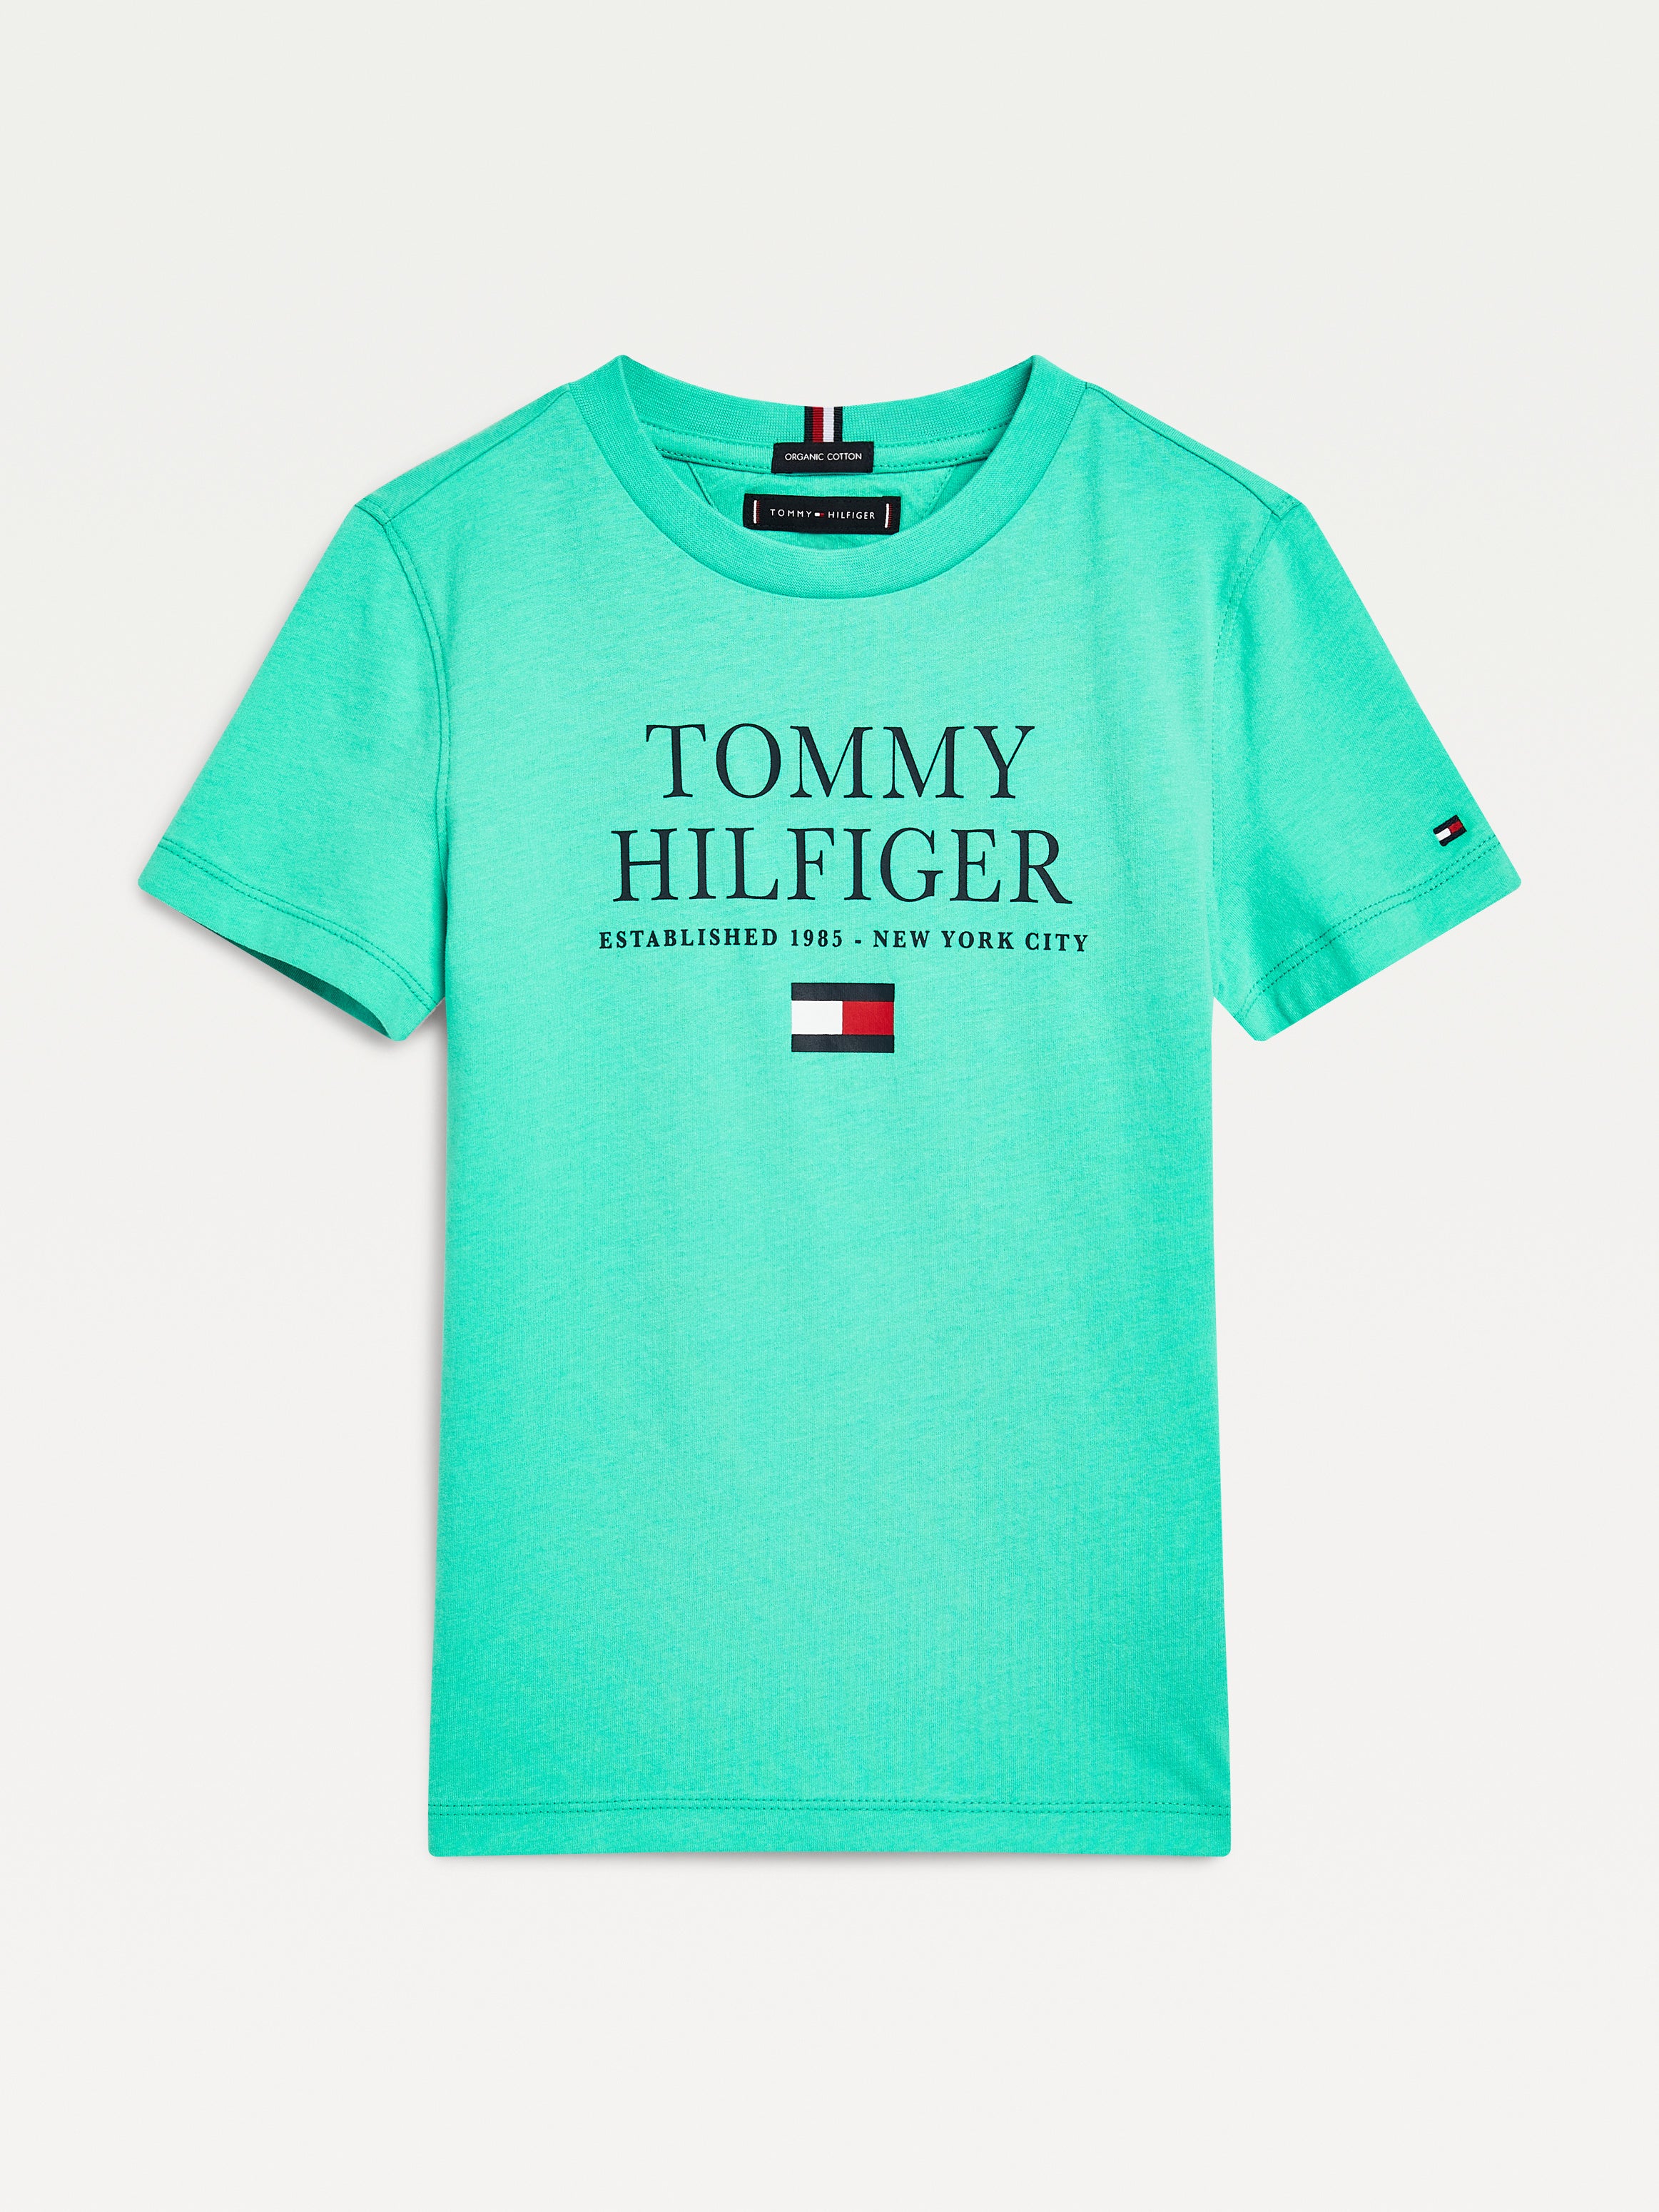 Tommy Hilfiger Th Logo Tee S/S